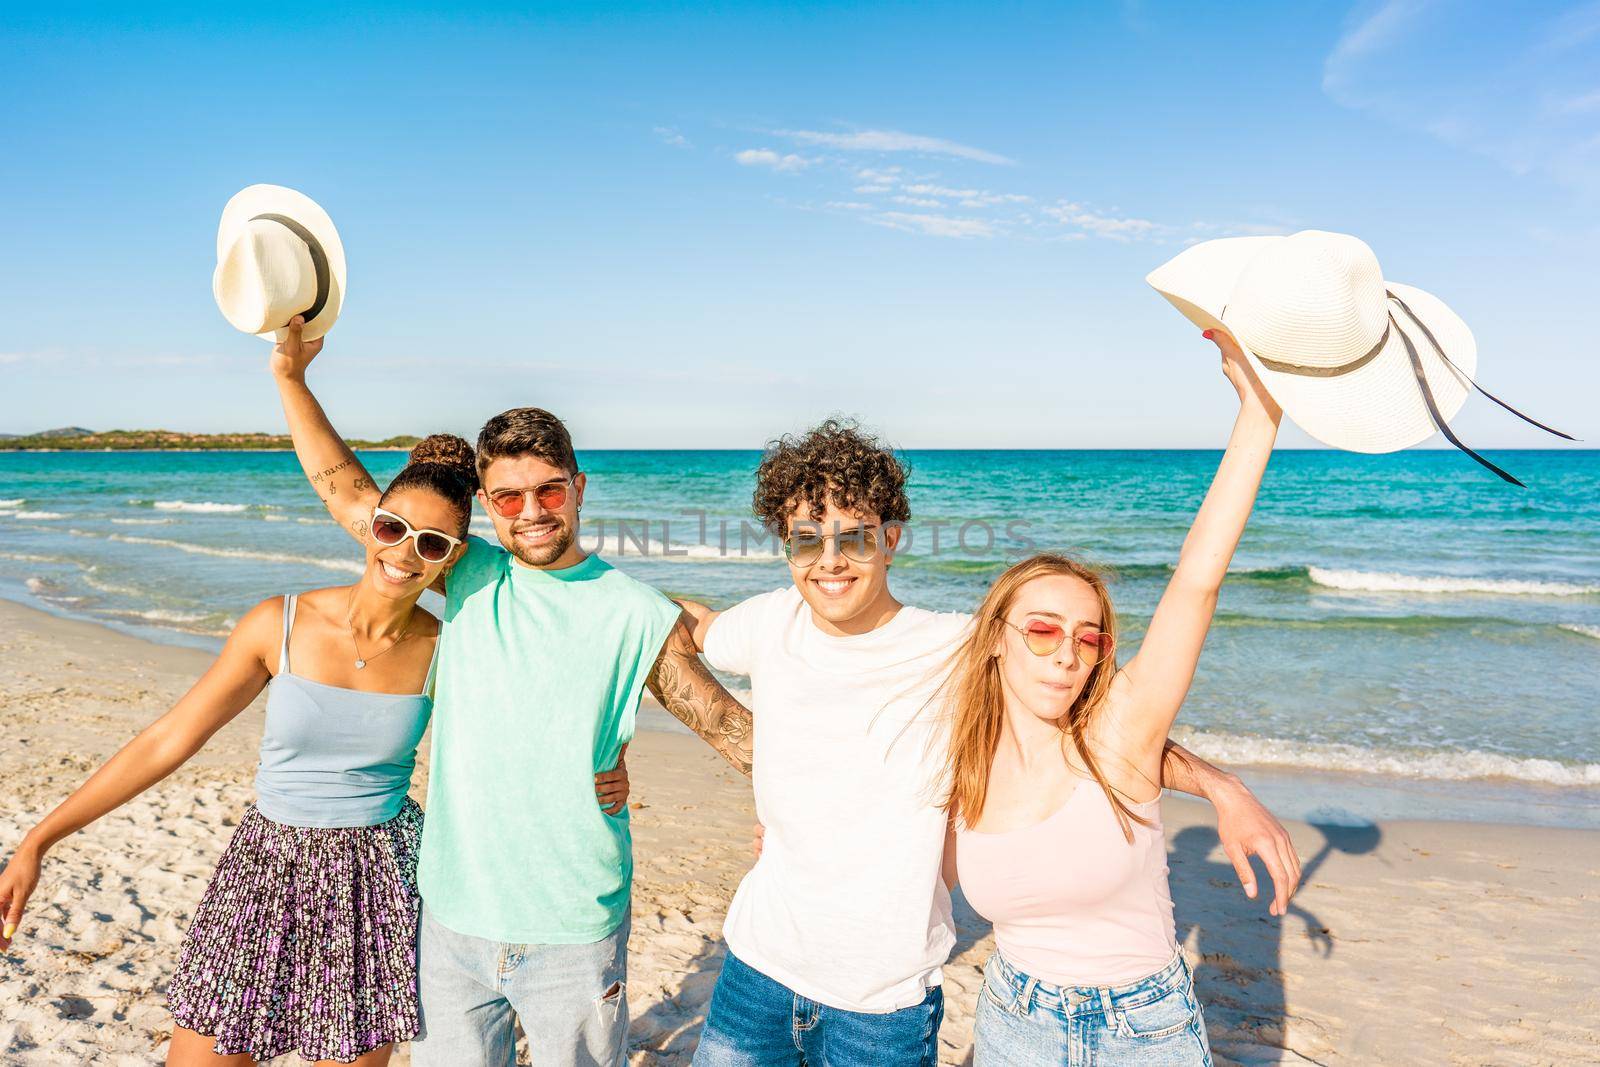 Group of gen z friends embracing to each other looking at camera on the seashore in tropical ocean resort. Happy students enjoying sea vacations together. Carefree people posing for photography